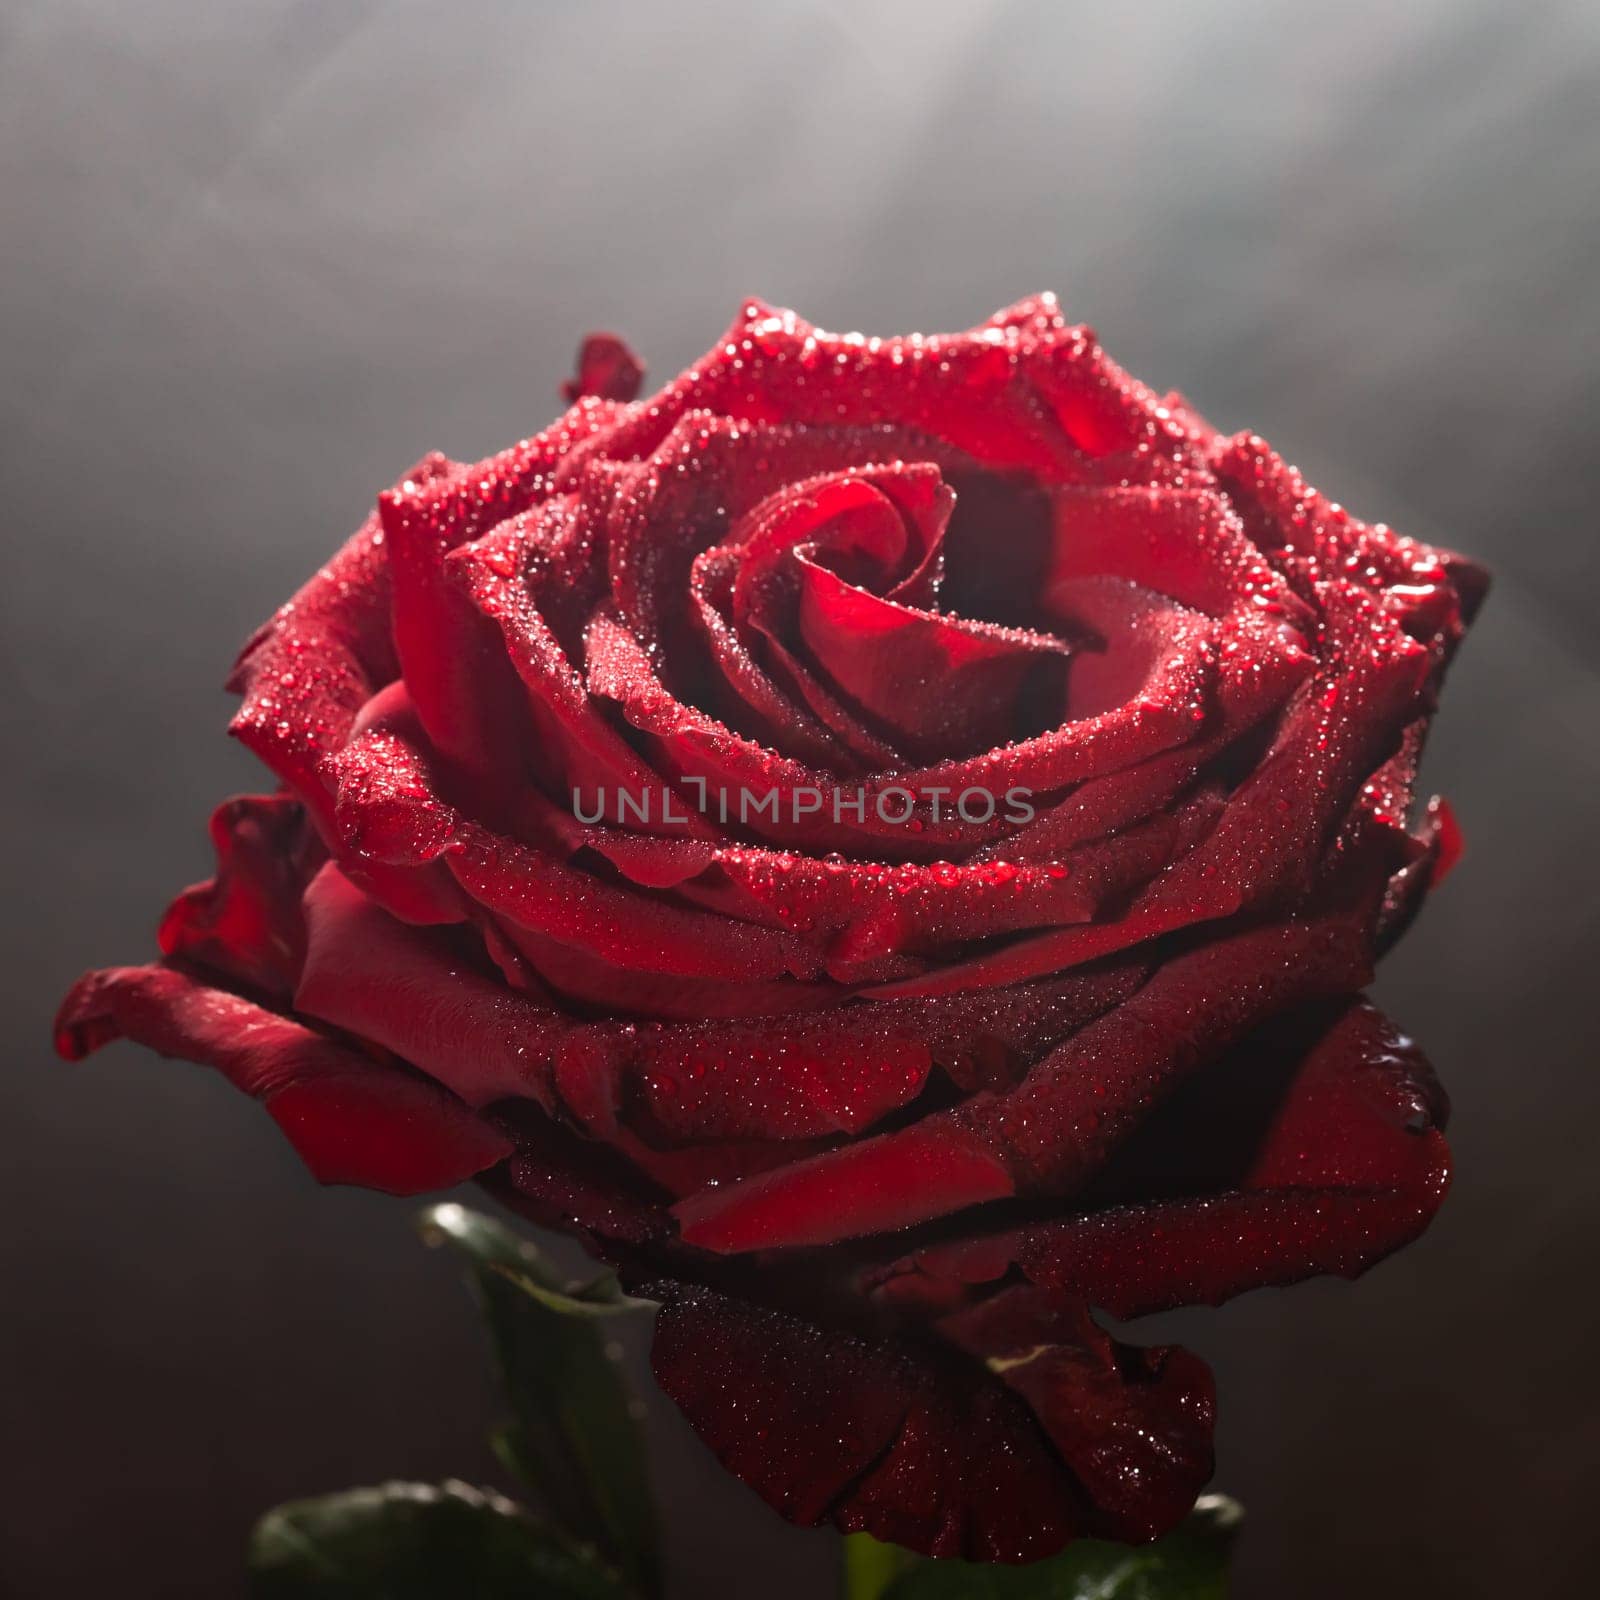 Blooming red rose bud in water drops and mist close-up on a black background by glavbooh